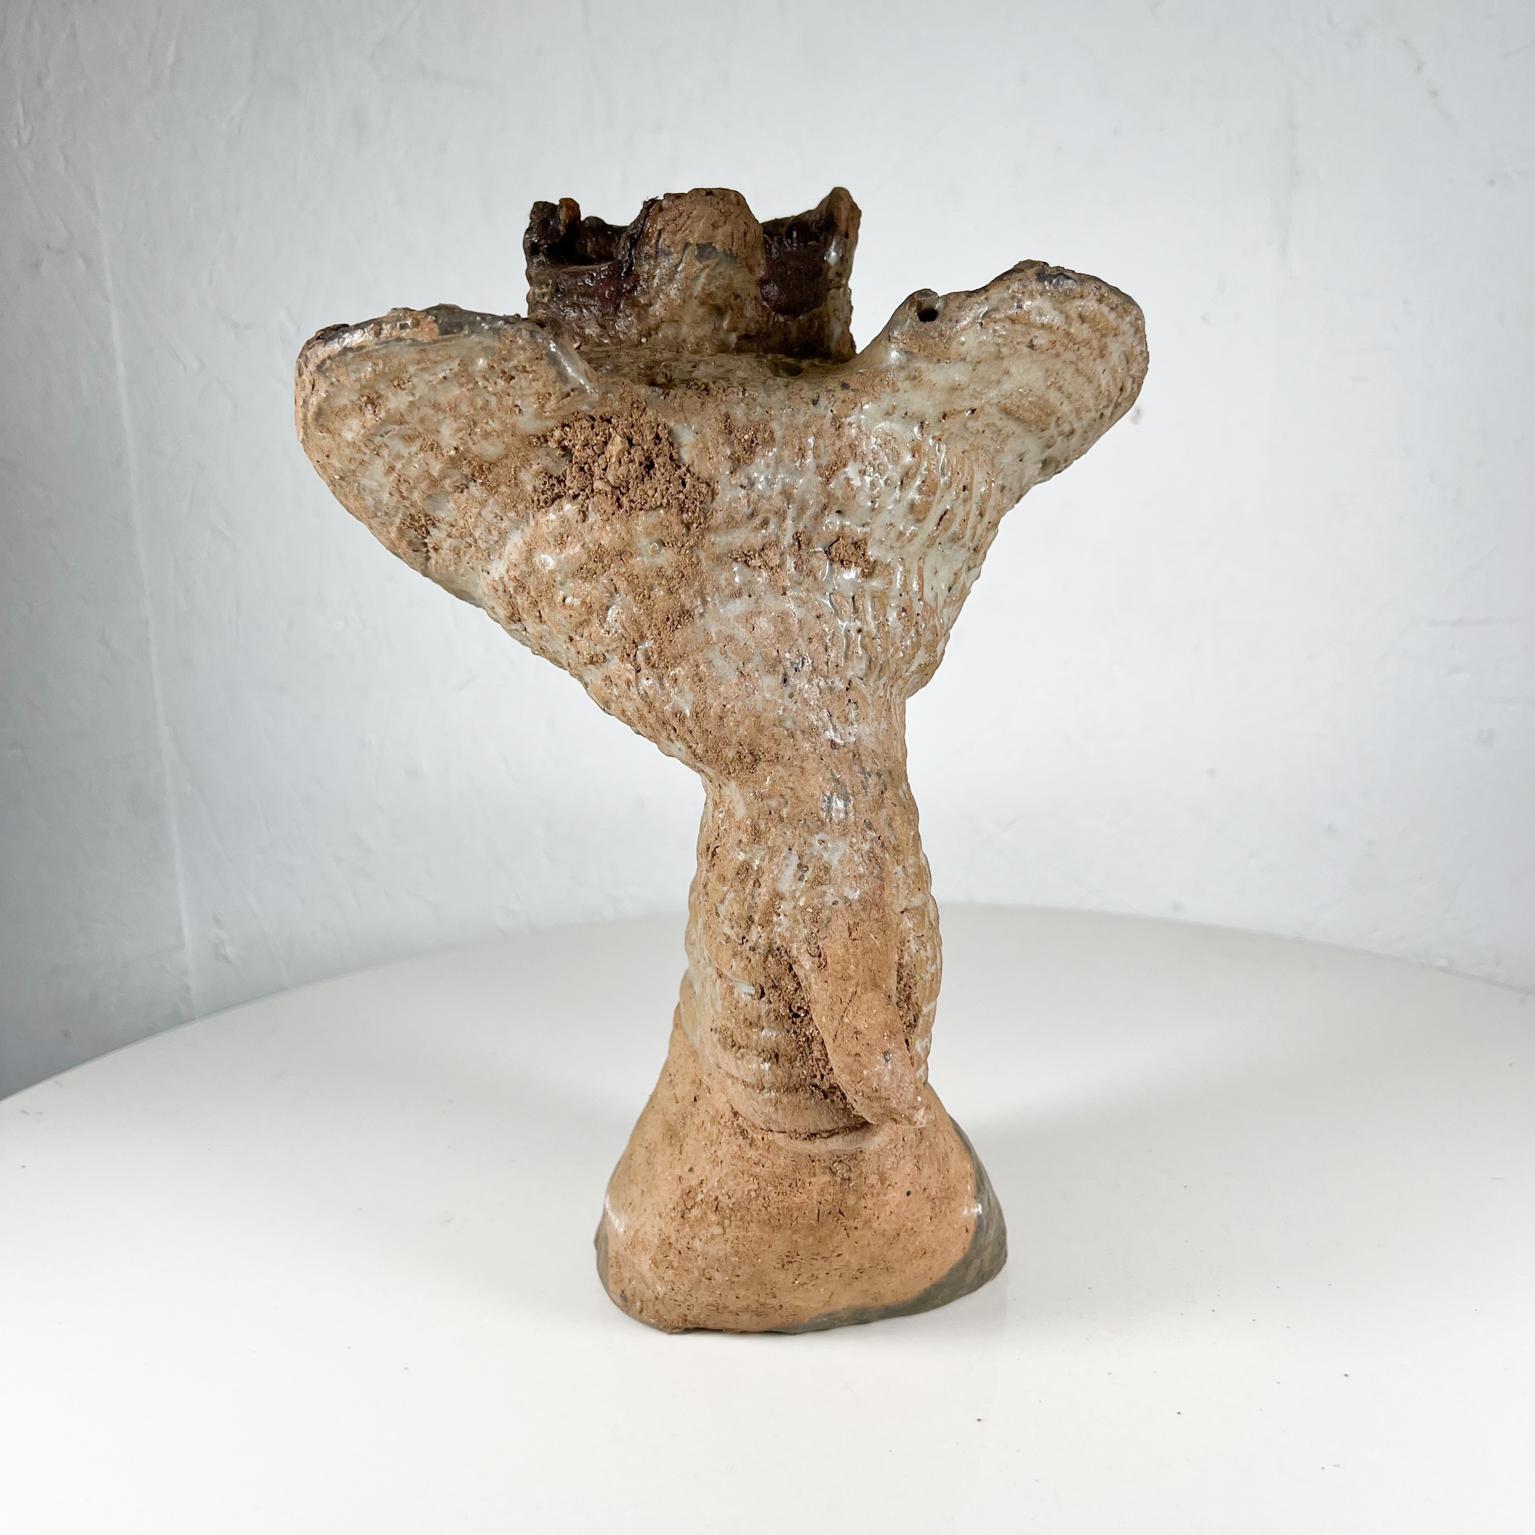 Organic Art Vintage Modern Pottery Textured Abstract Hoof Sculpture In Good Condition For Sale In Chula Vista, CA